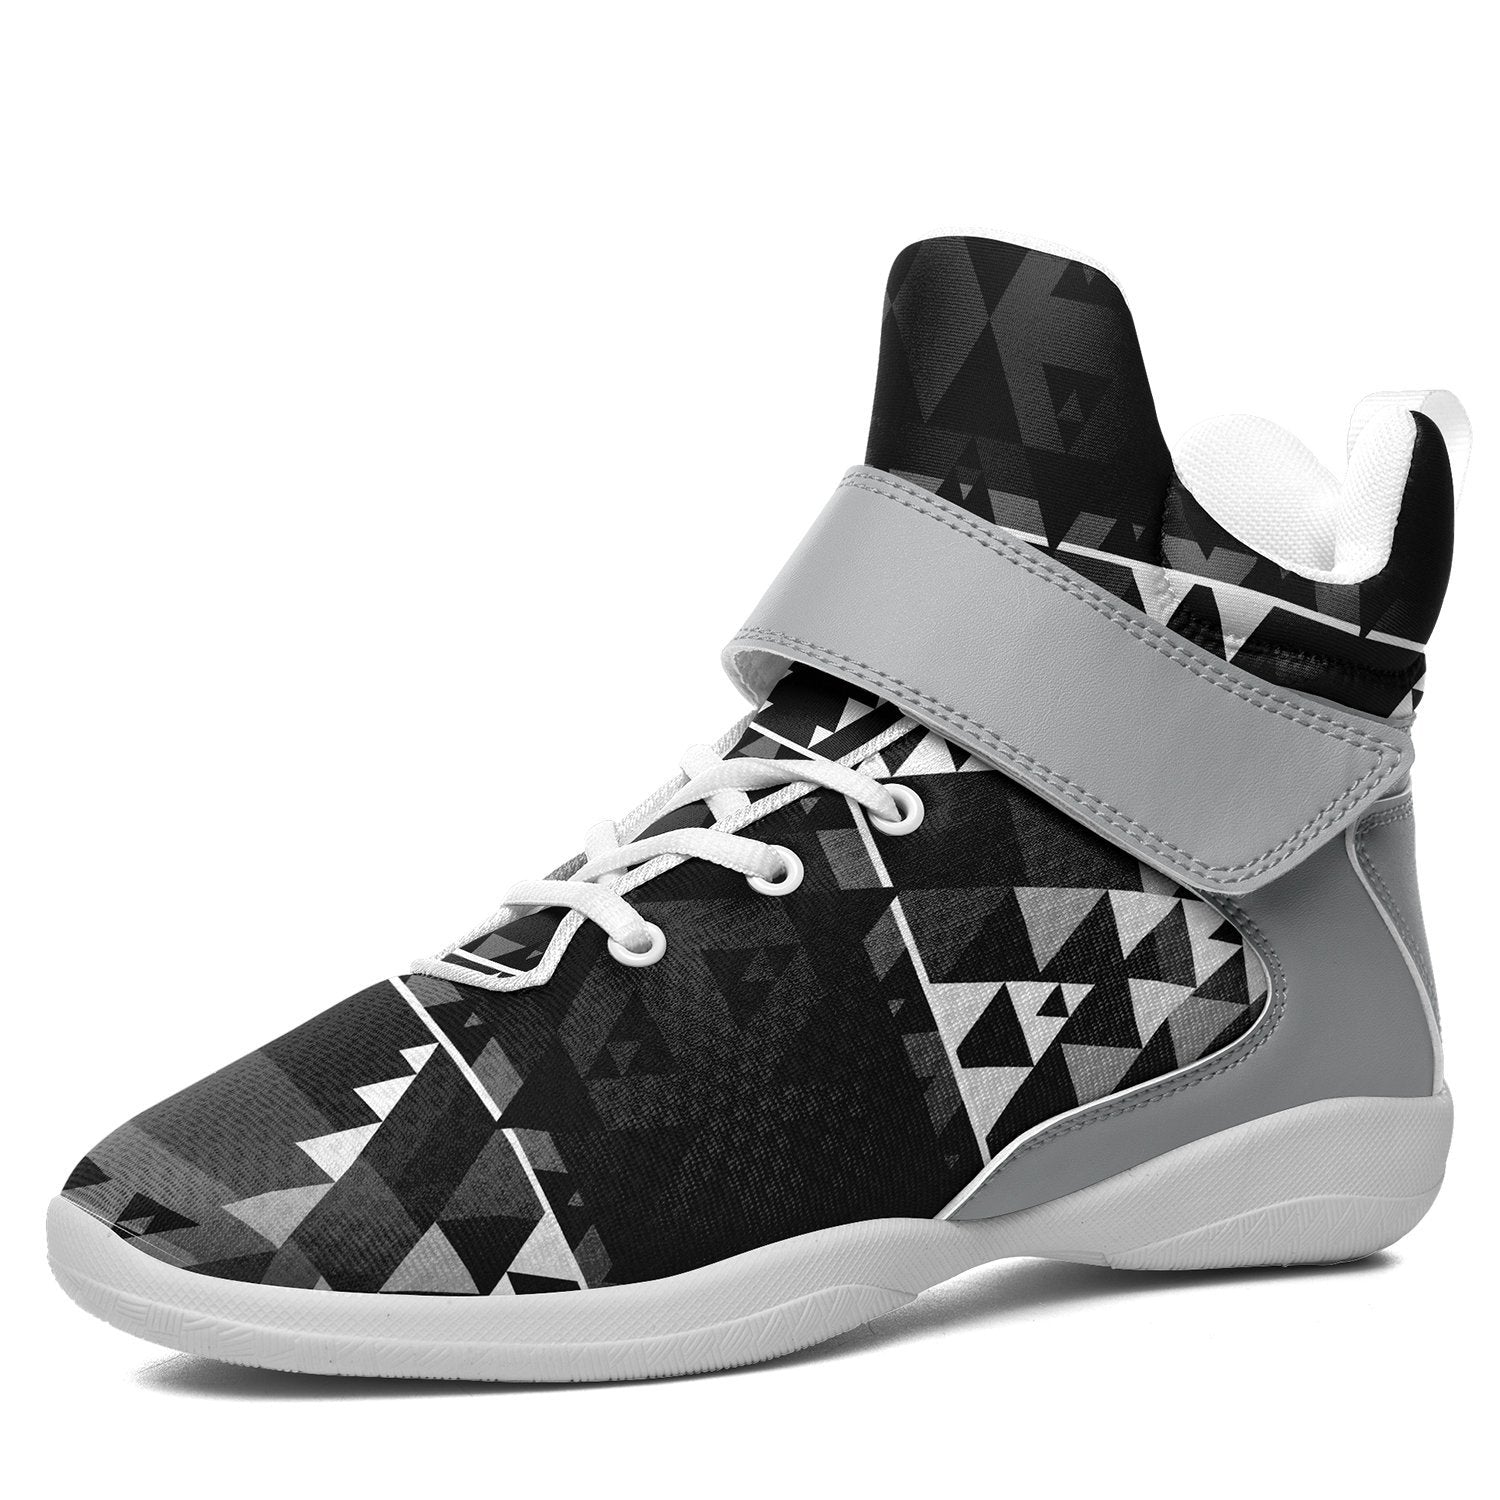 Writing on Stone Black and White Ipottaa Basketball / Sport High Top Shoes - White Sole 49 Dzine US Men 7 / EUR 40 White Sole with Gray Strap 